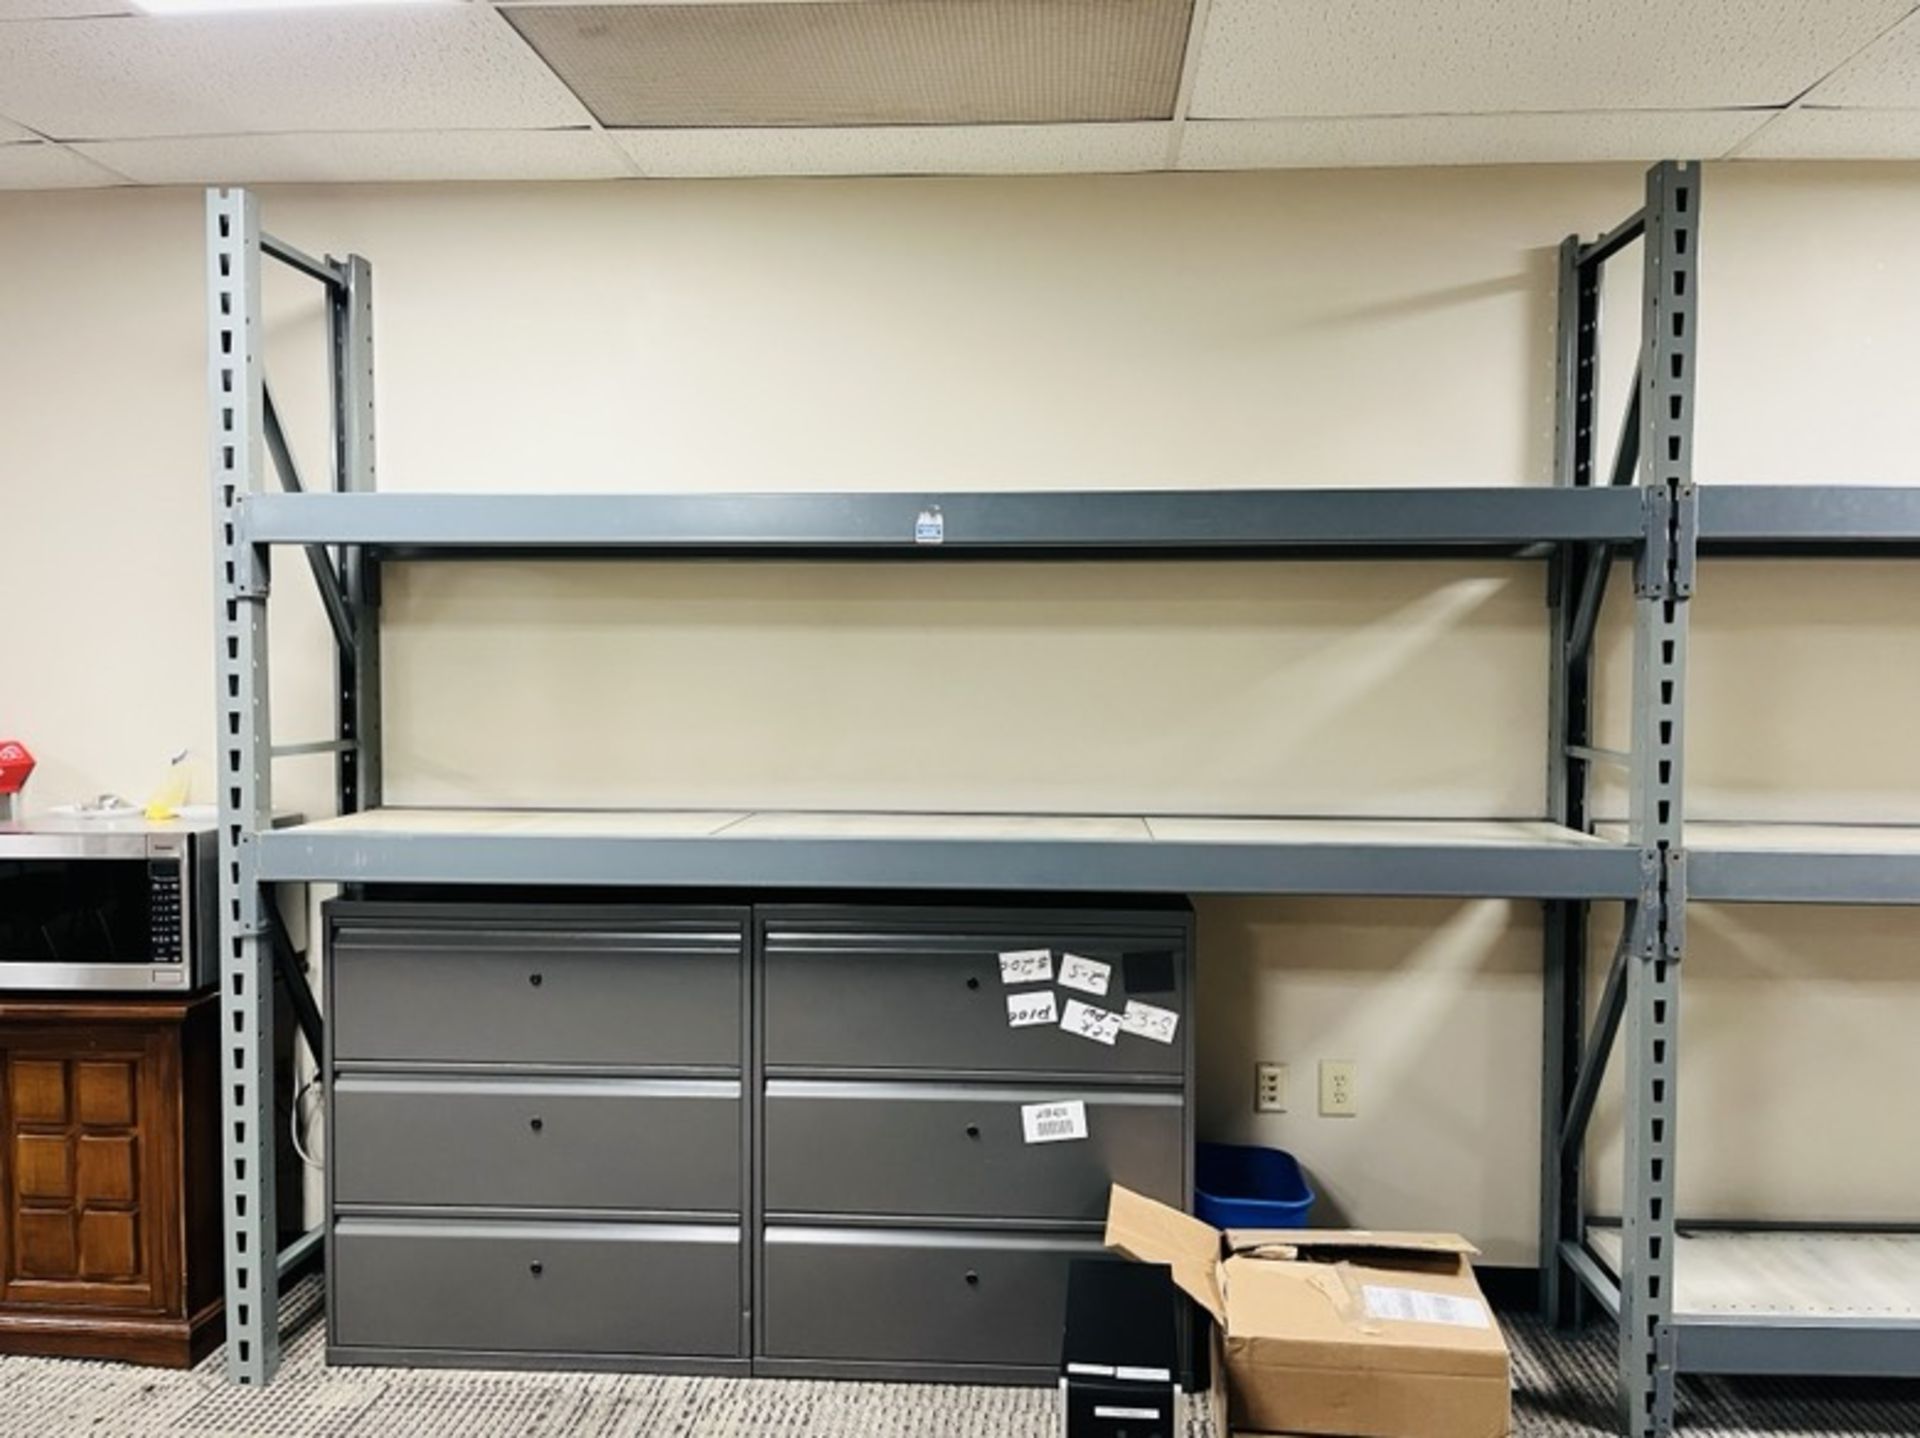 10 SECTION OF RETAIL/MERCHANDISE PALLET RACK SHELVING 6'H X 21.5"D X 108"L WITH 3 SHELVES - Image 2 of 4